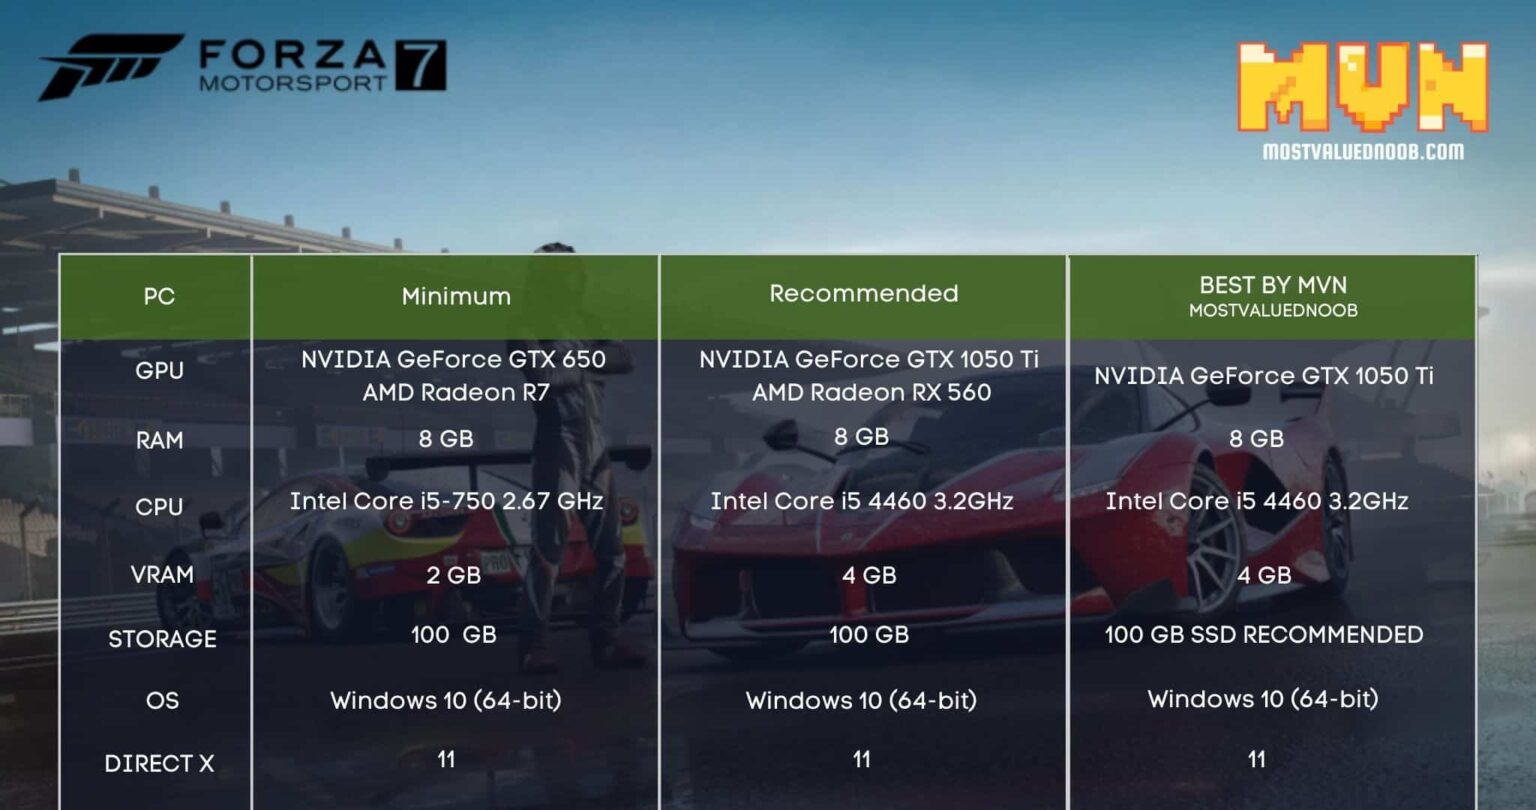 Forza Motorsport 7 System Requirements Can I Enjoy it on my PC?